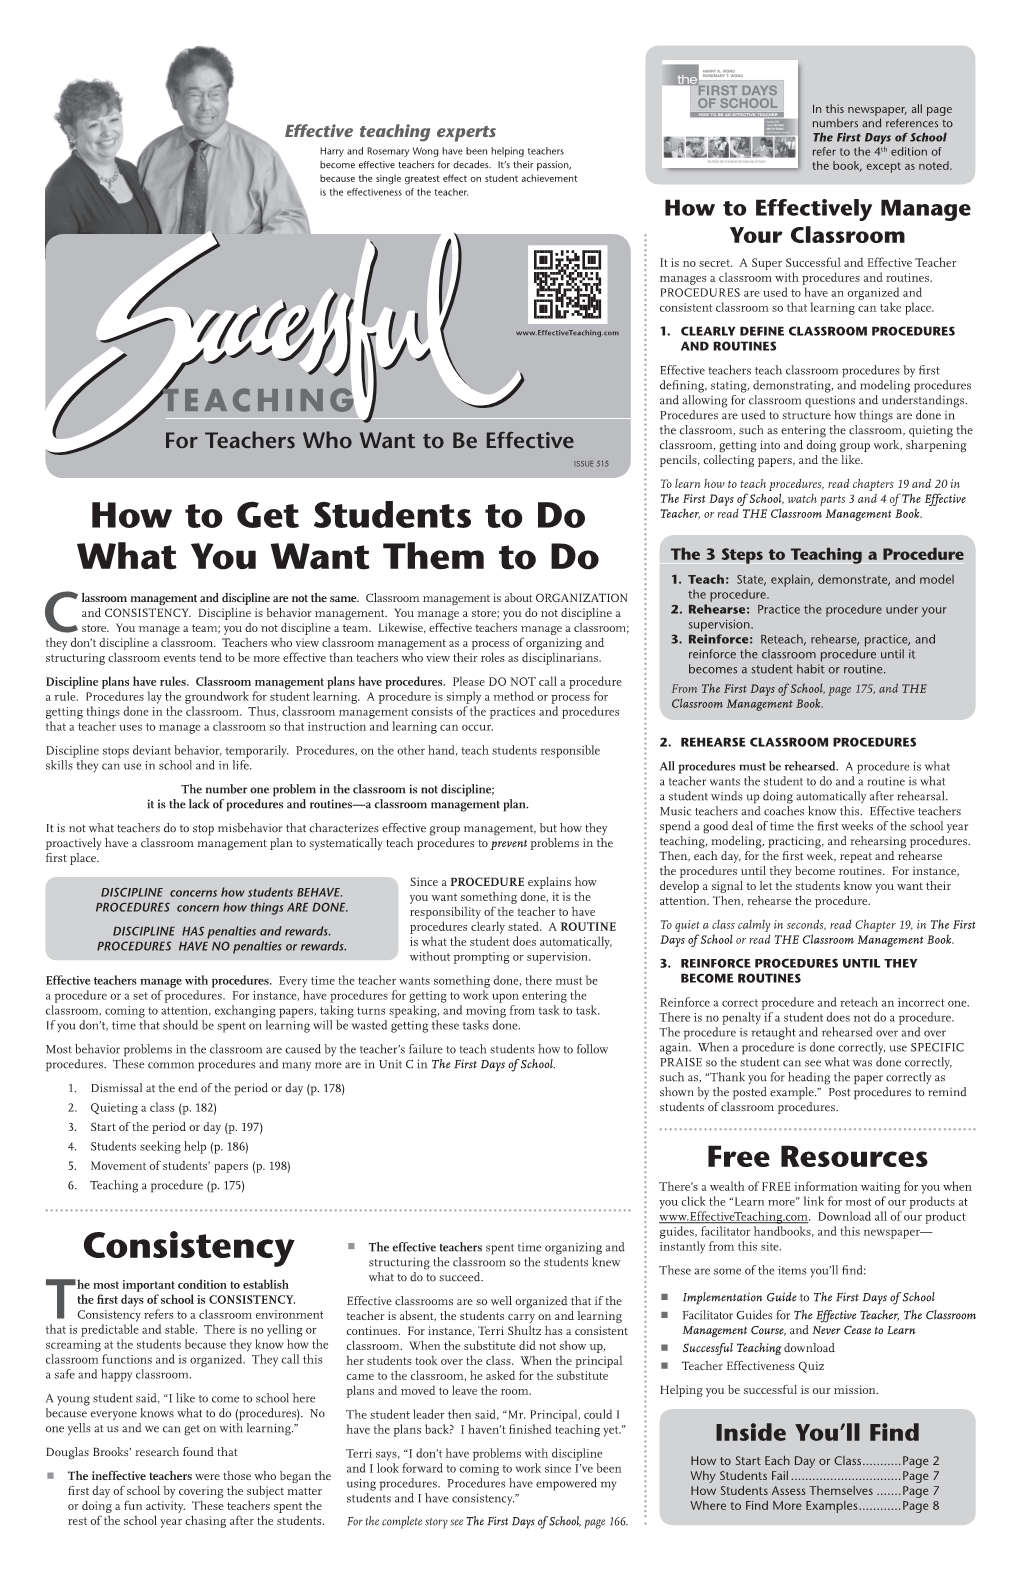 Successful Teaching Newspapers Link, a Pass Code, and Directions for Retrieving $87.00 Per DVD the Item for Your Personal Use